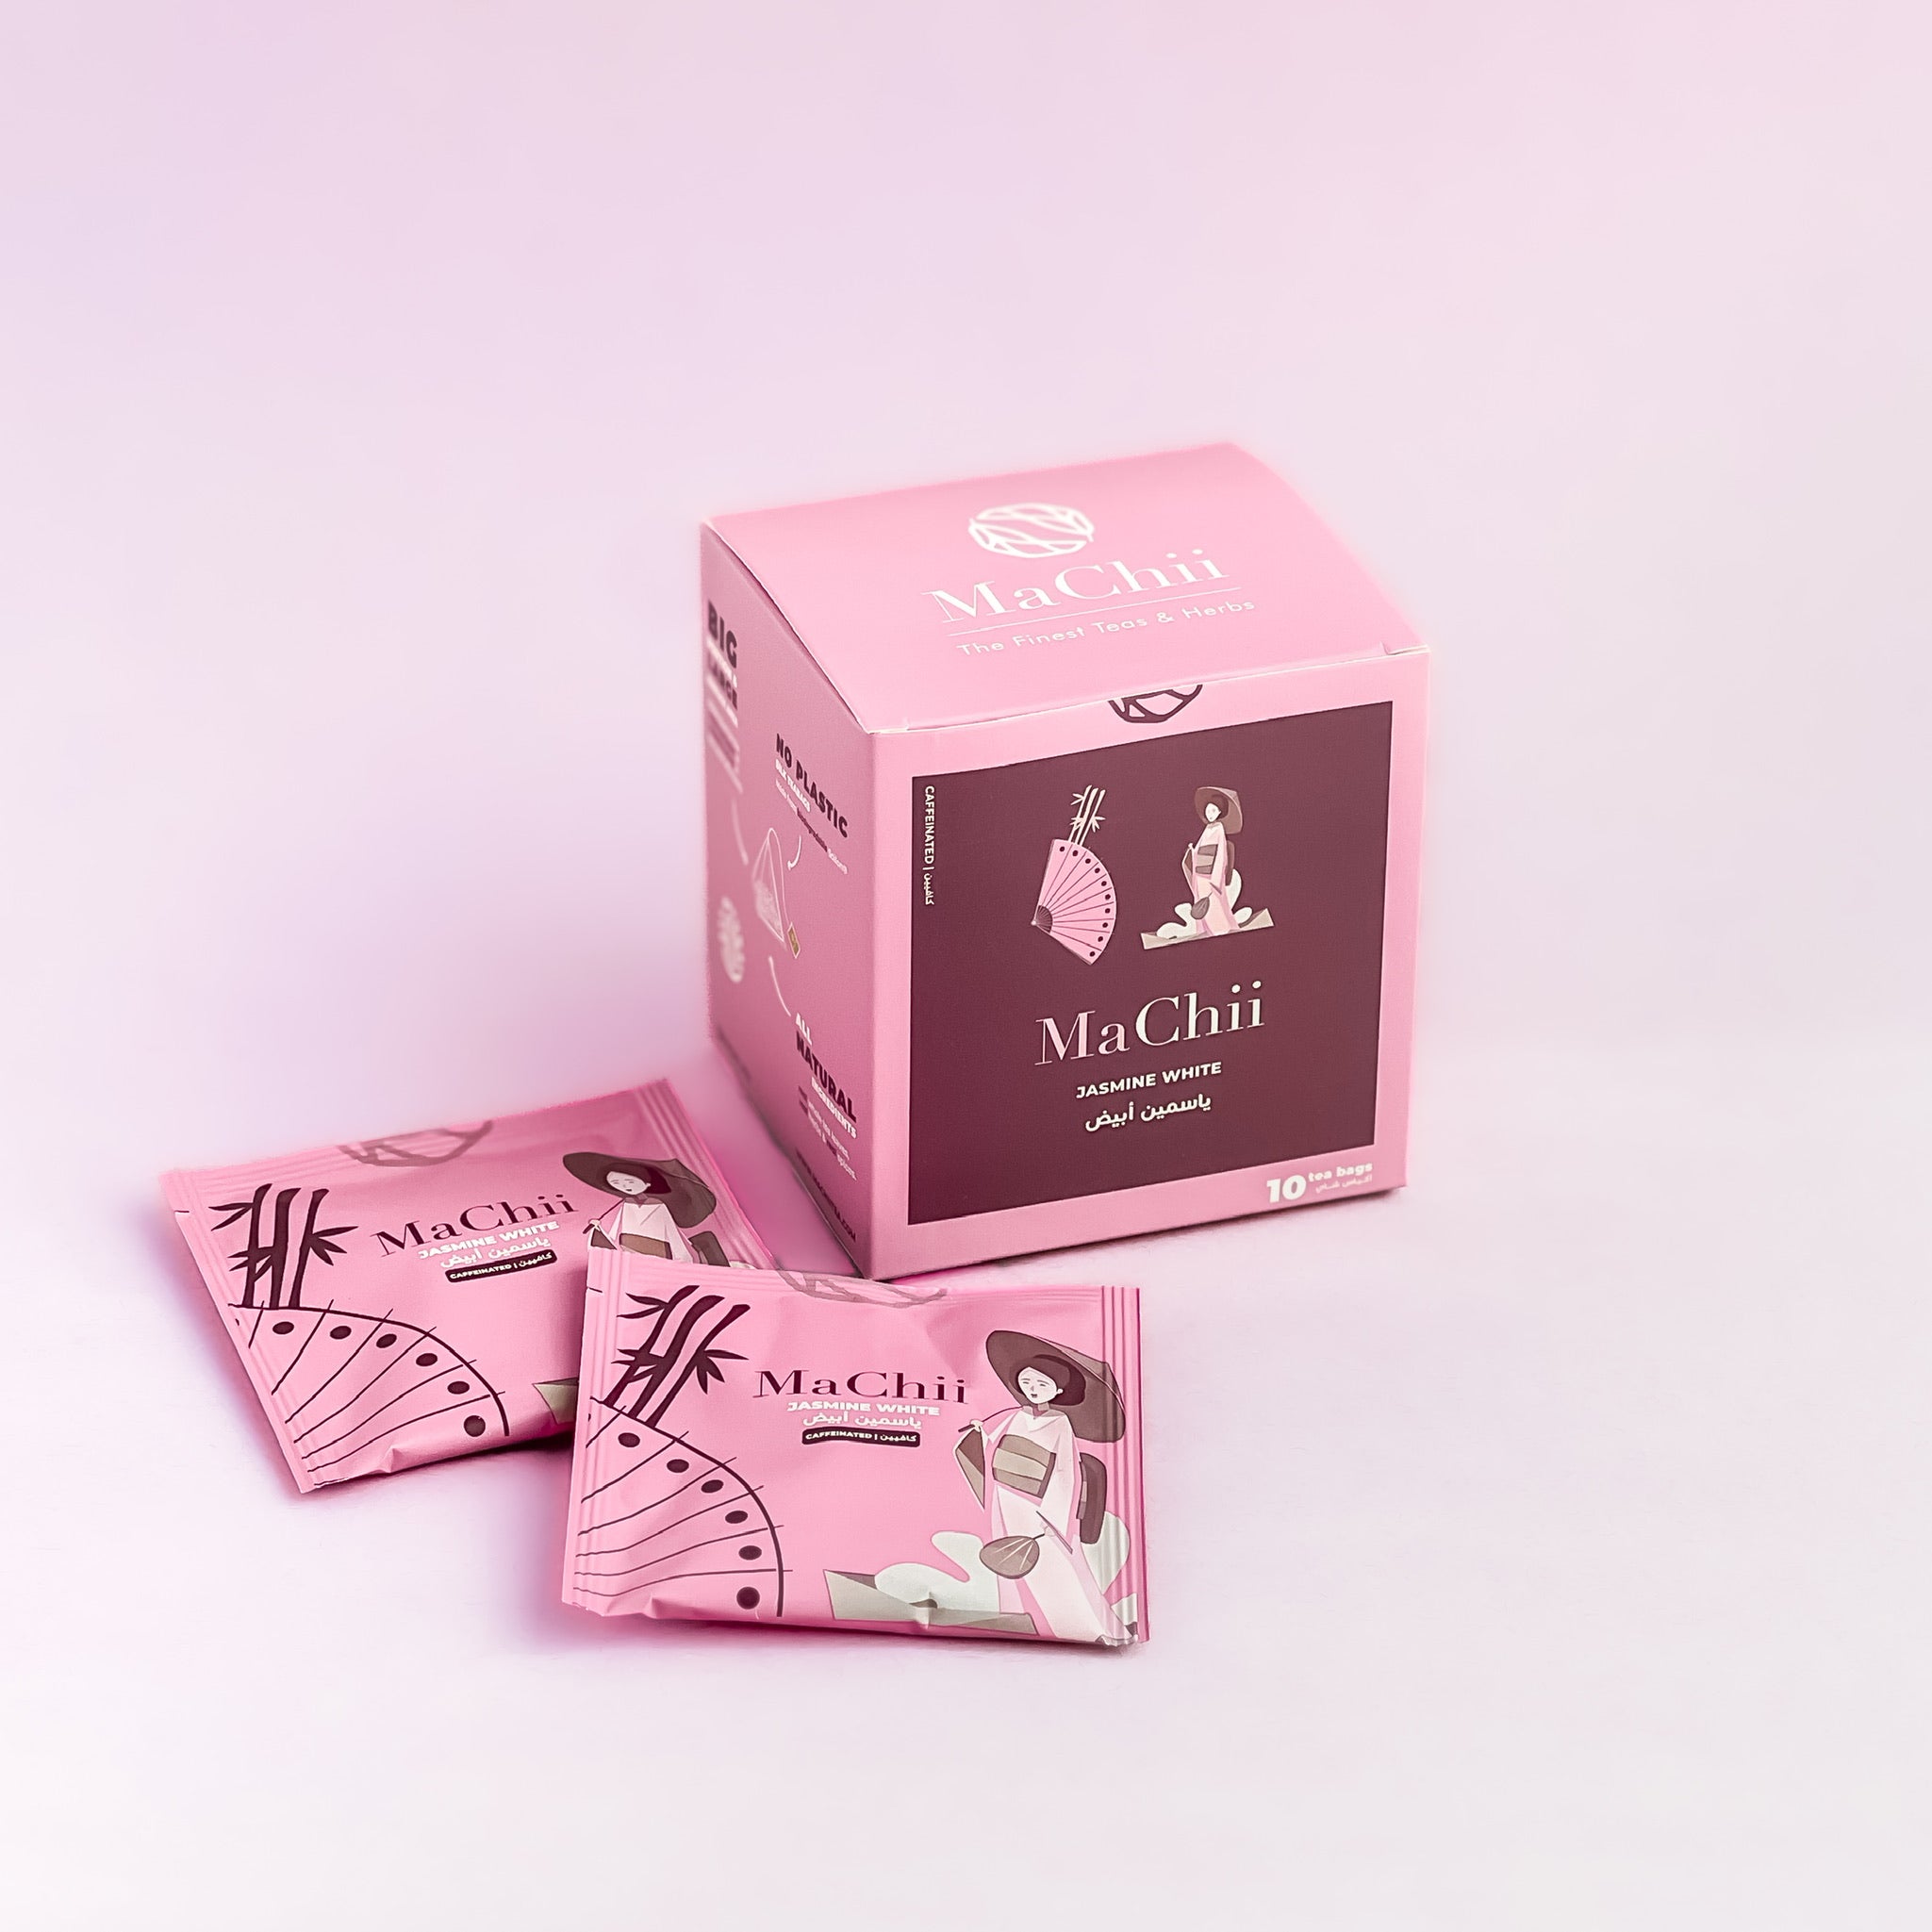 organic jasmine white tea bags wrapped in individual envelopes. a geisha and a Japanese fan cover the packaging 